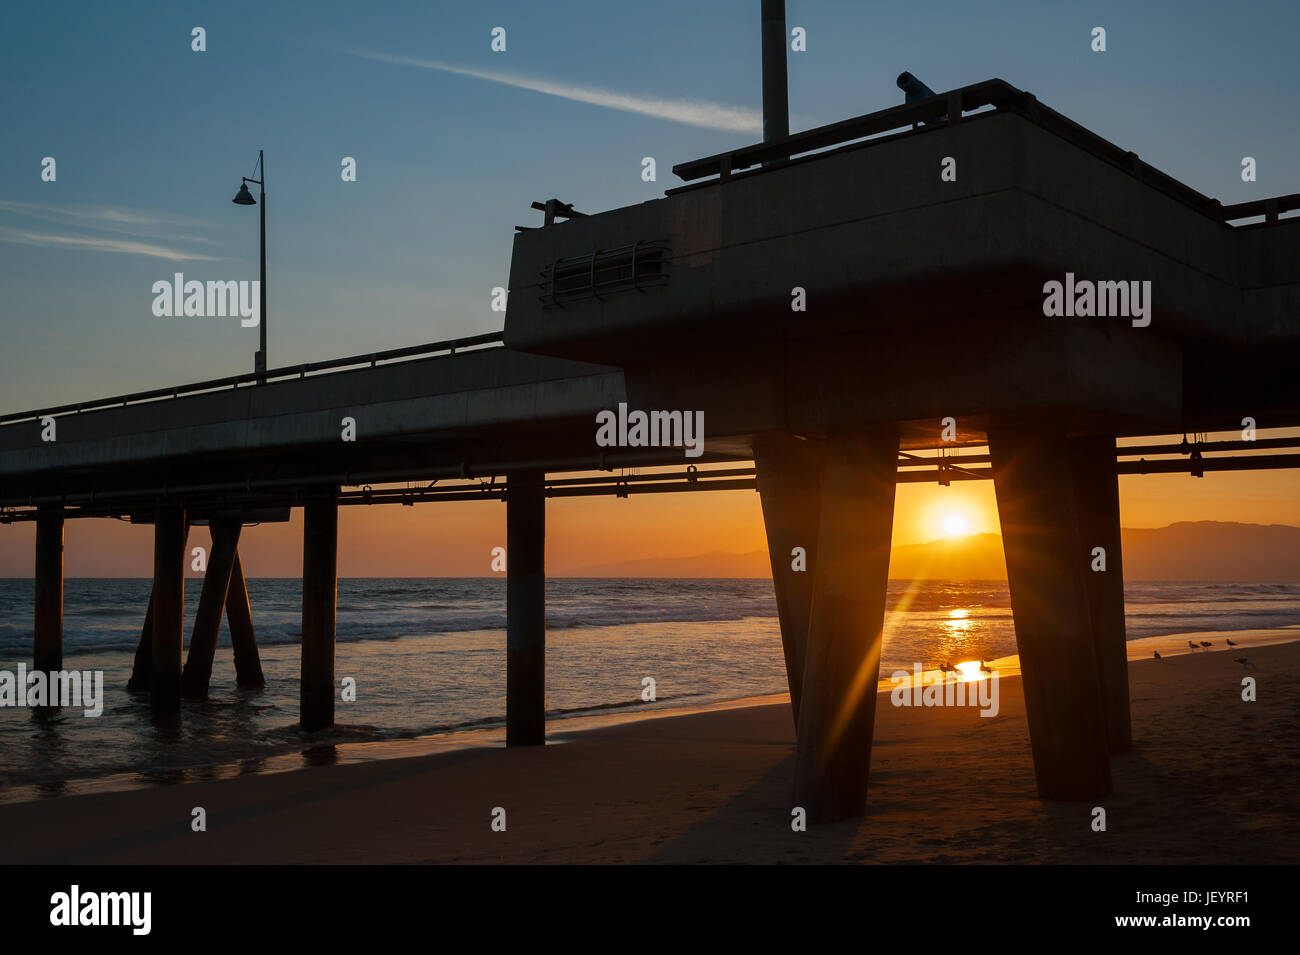 Silhouette of the iconic Venice Fishing Pier photographed at sunset in Marina Del Rey, CA. Stock Photo